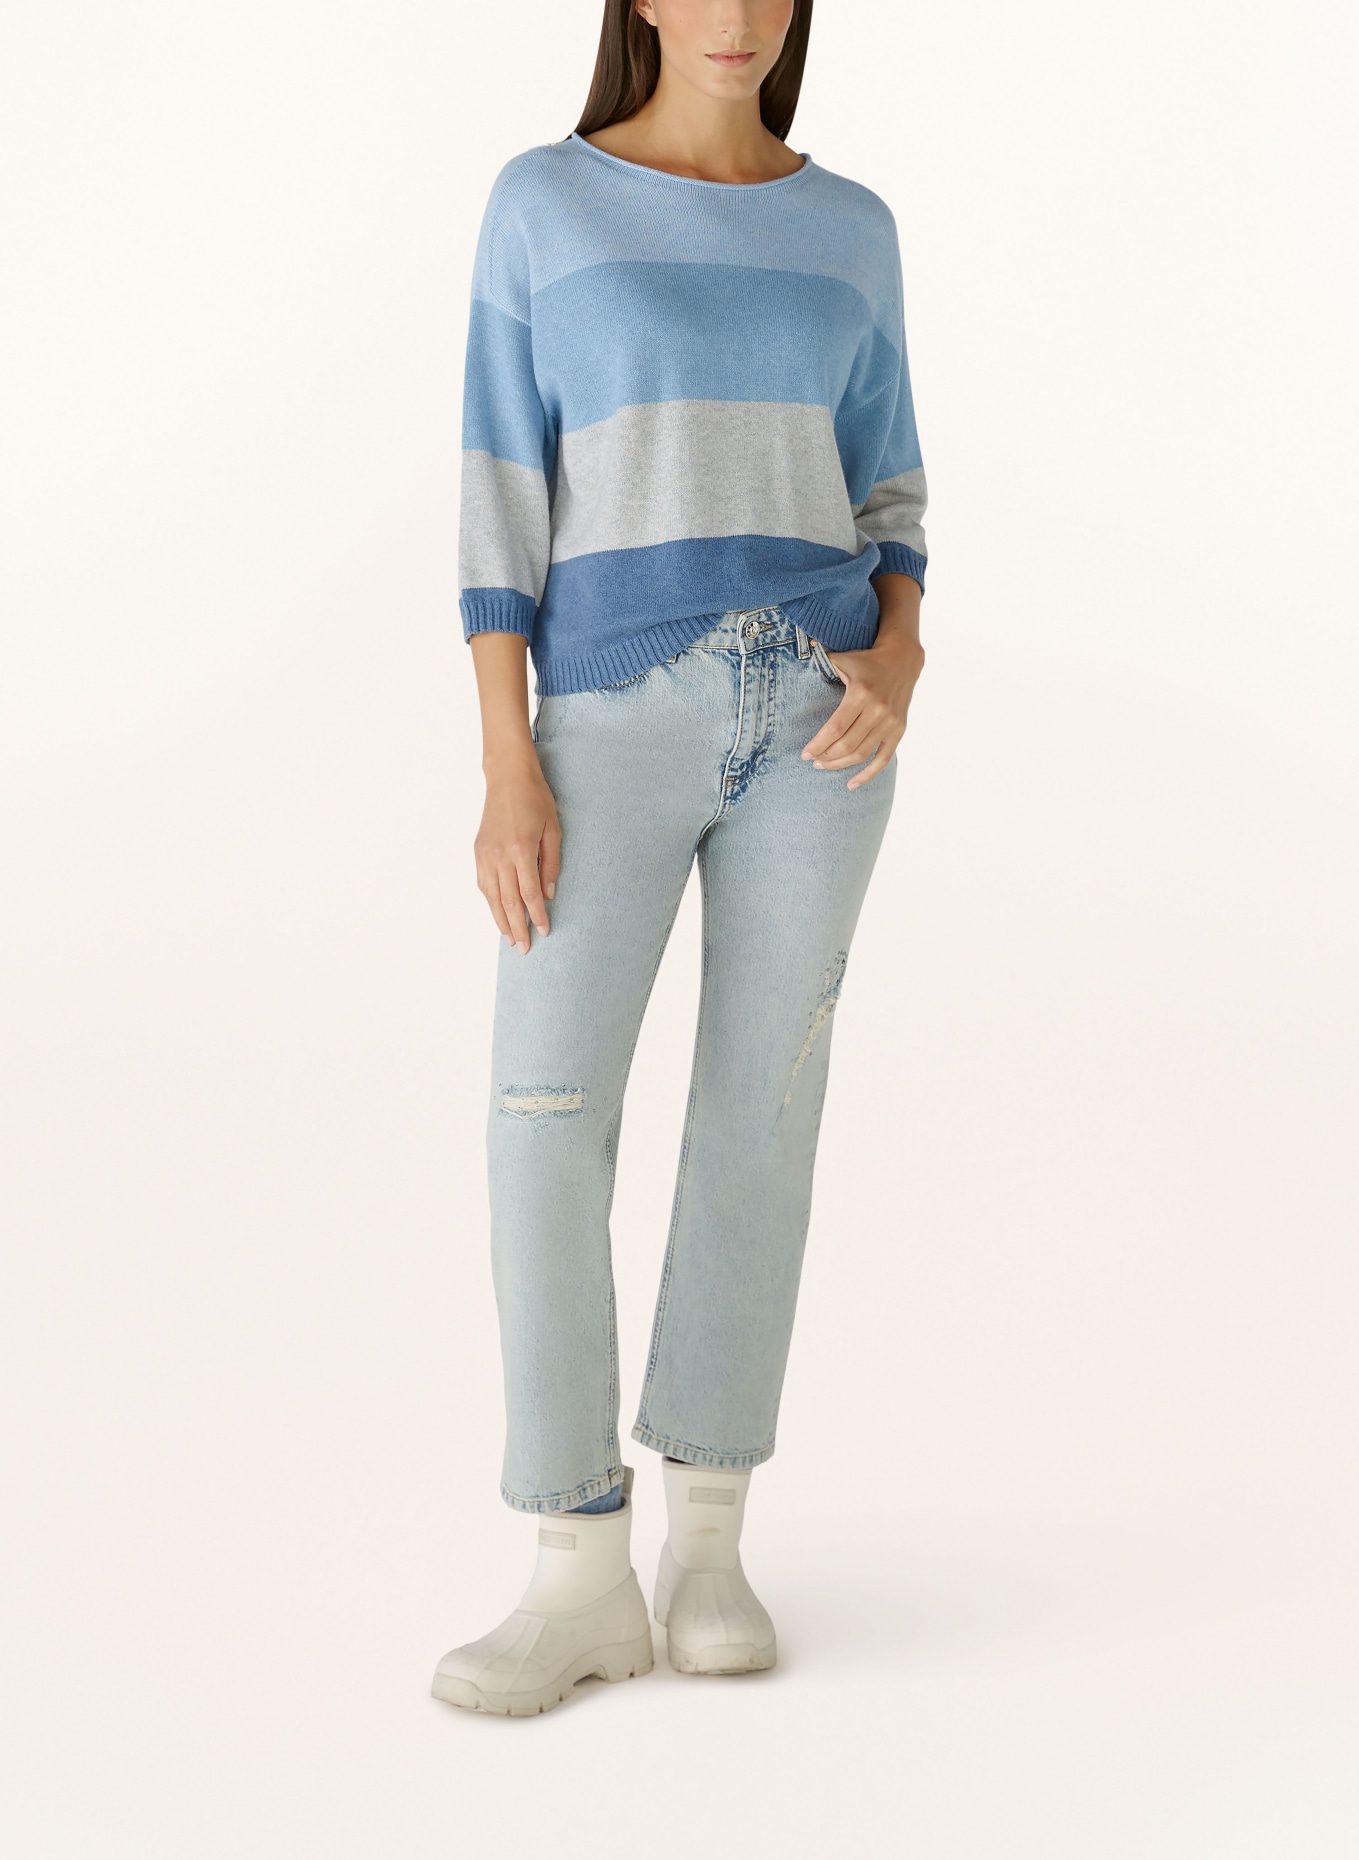 oui Sweater with 3/4 sleeves, Color: LIGHT BLUE/ BLUE/ LIGHT GRAY (Image 2)